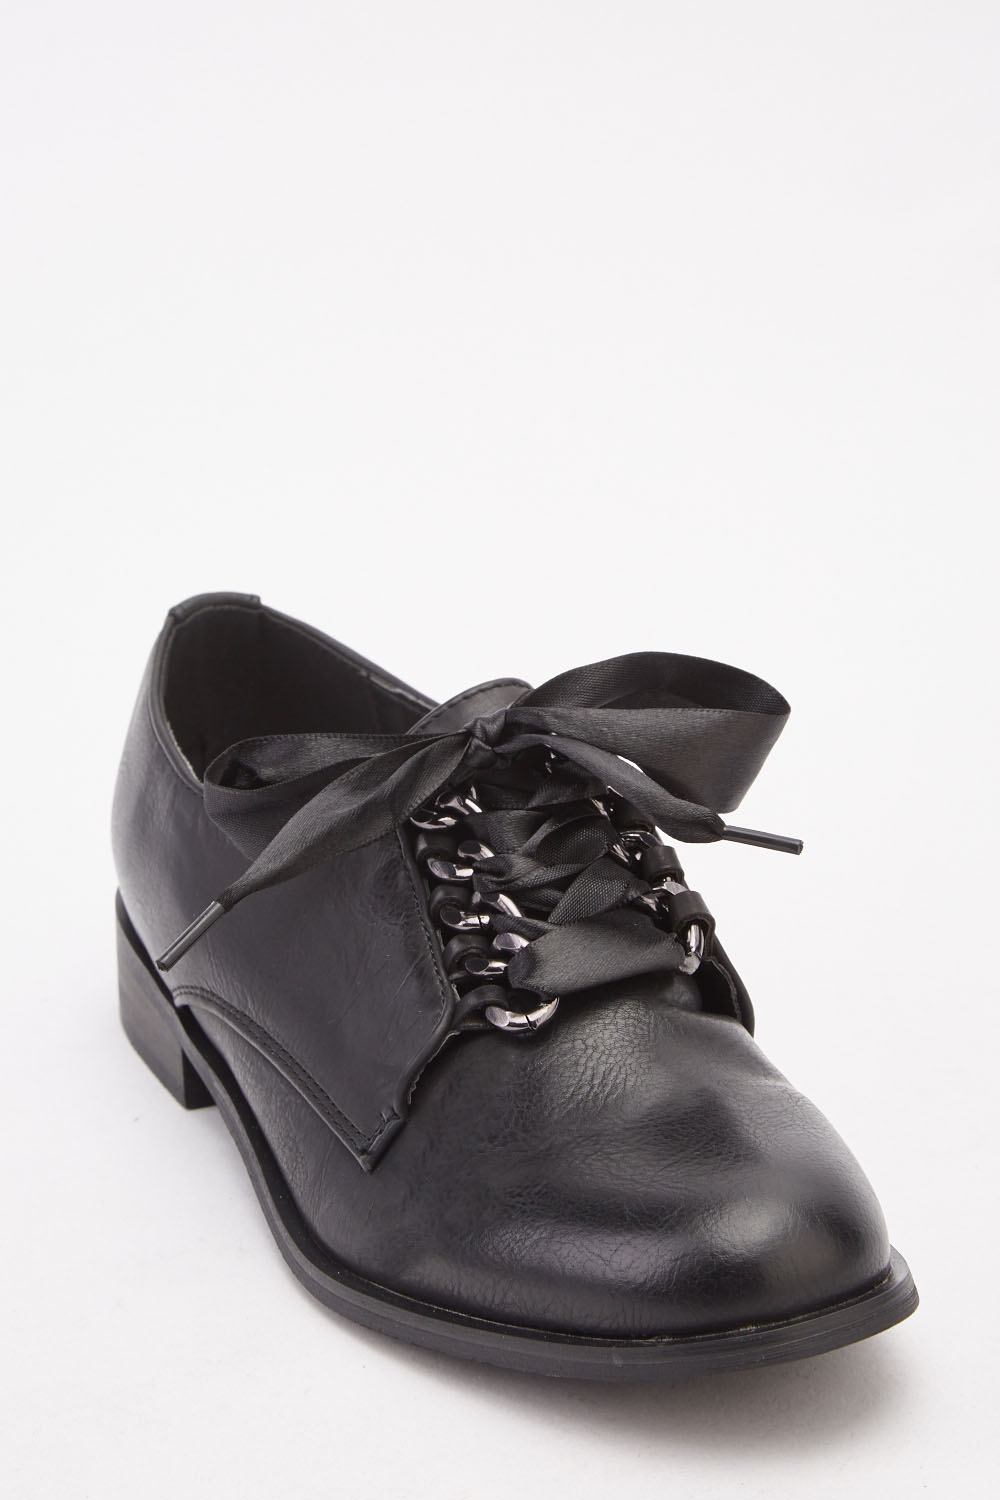 Ribbon Lace Up Oxford Shoes - Just $7